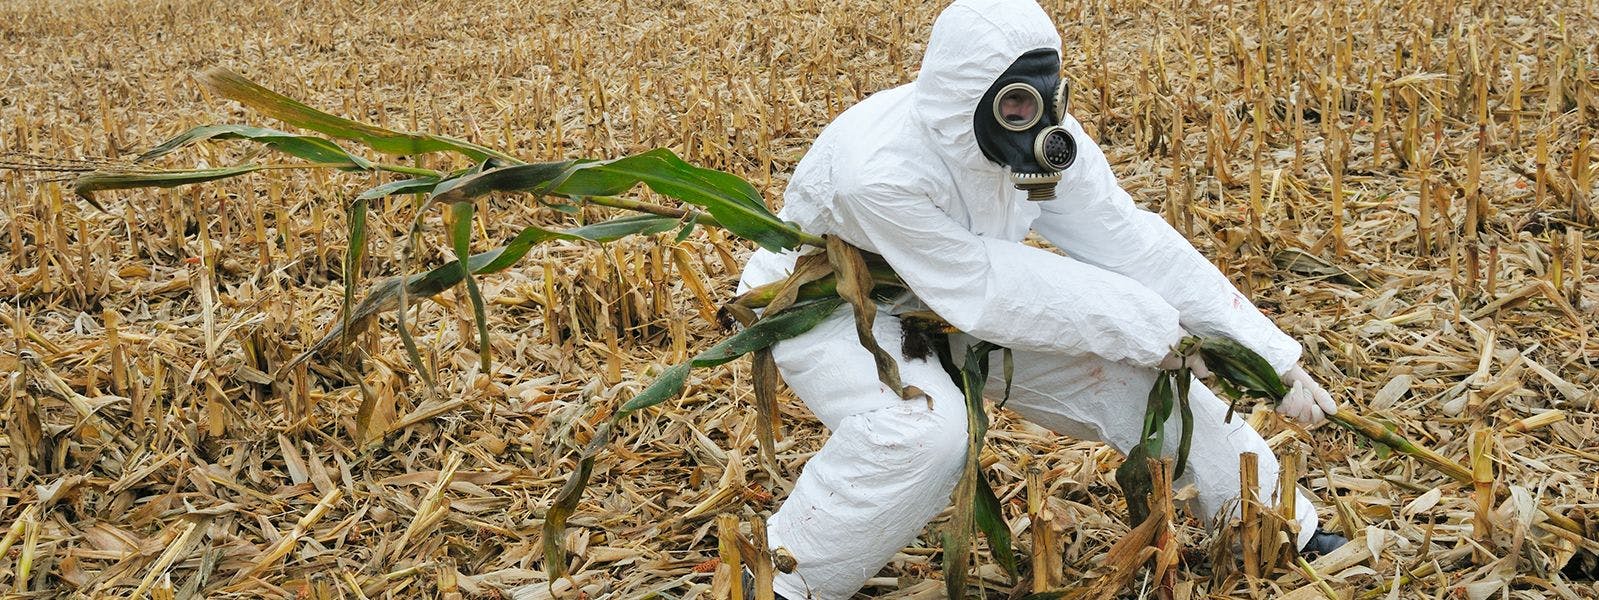 Someone in a hazmat suit pulling on a corn stalk